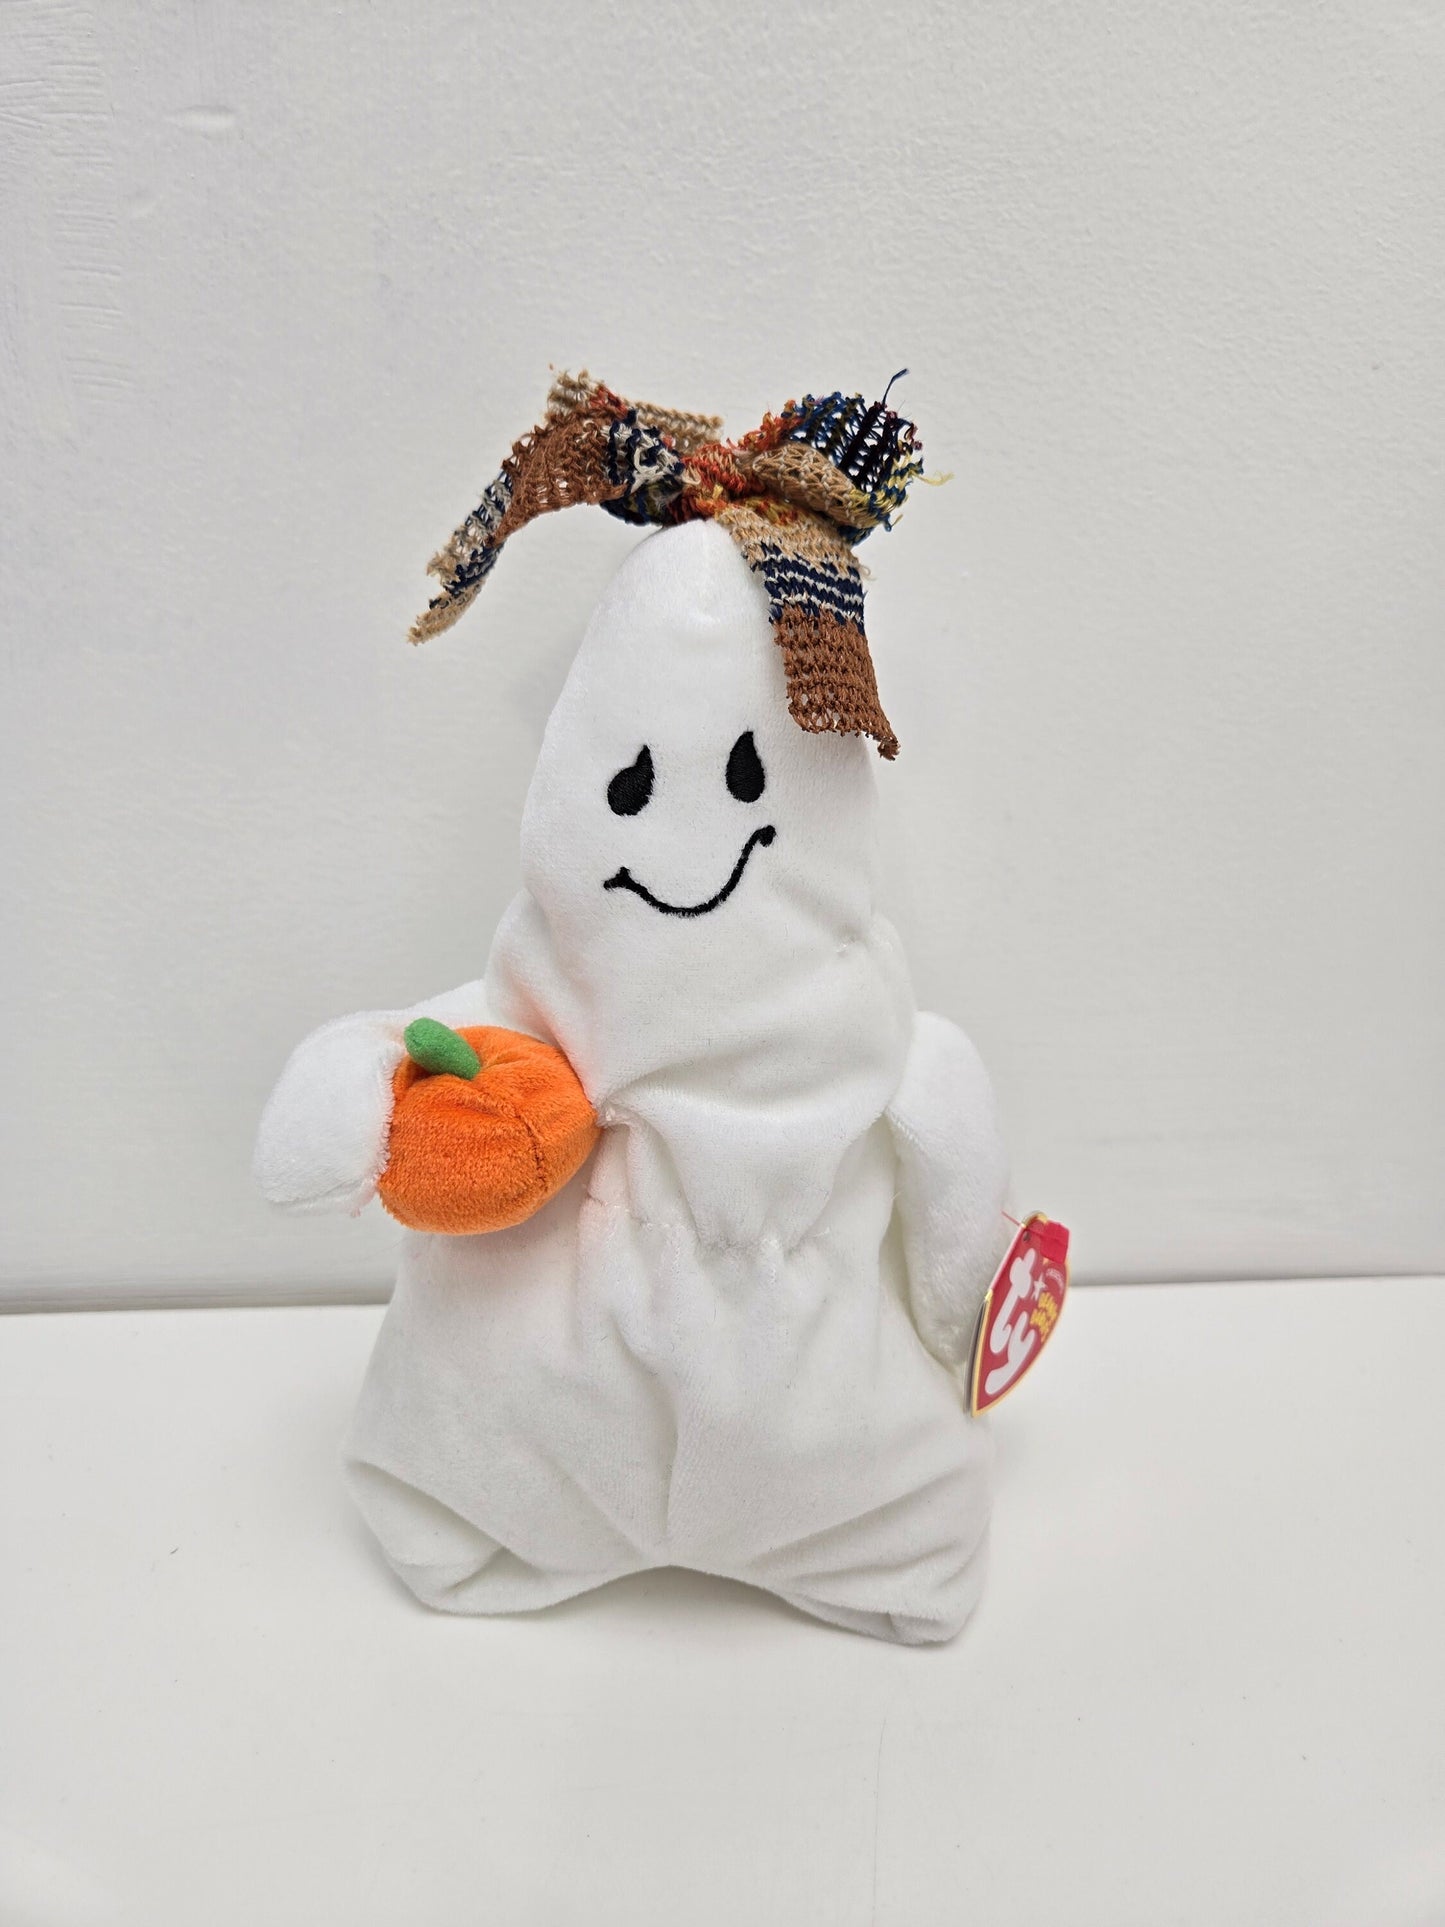 Ty Beanie Baby “Ghoulianne” the Girl Ghost (7.5 inch)